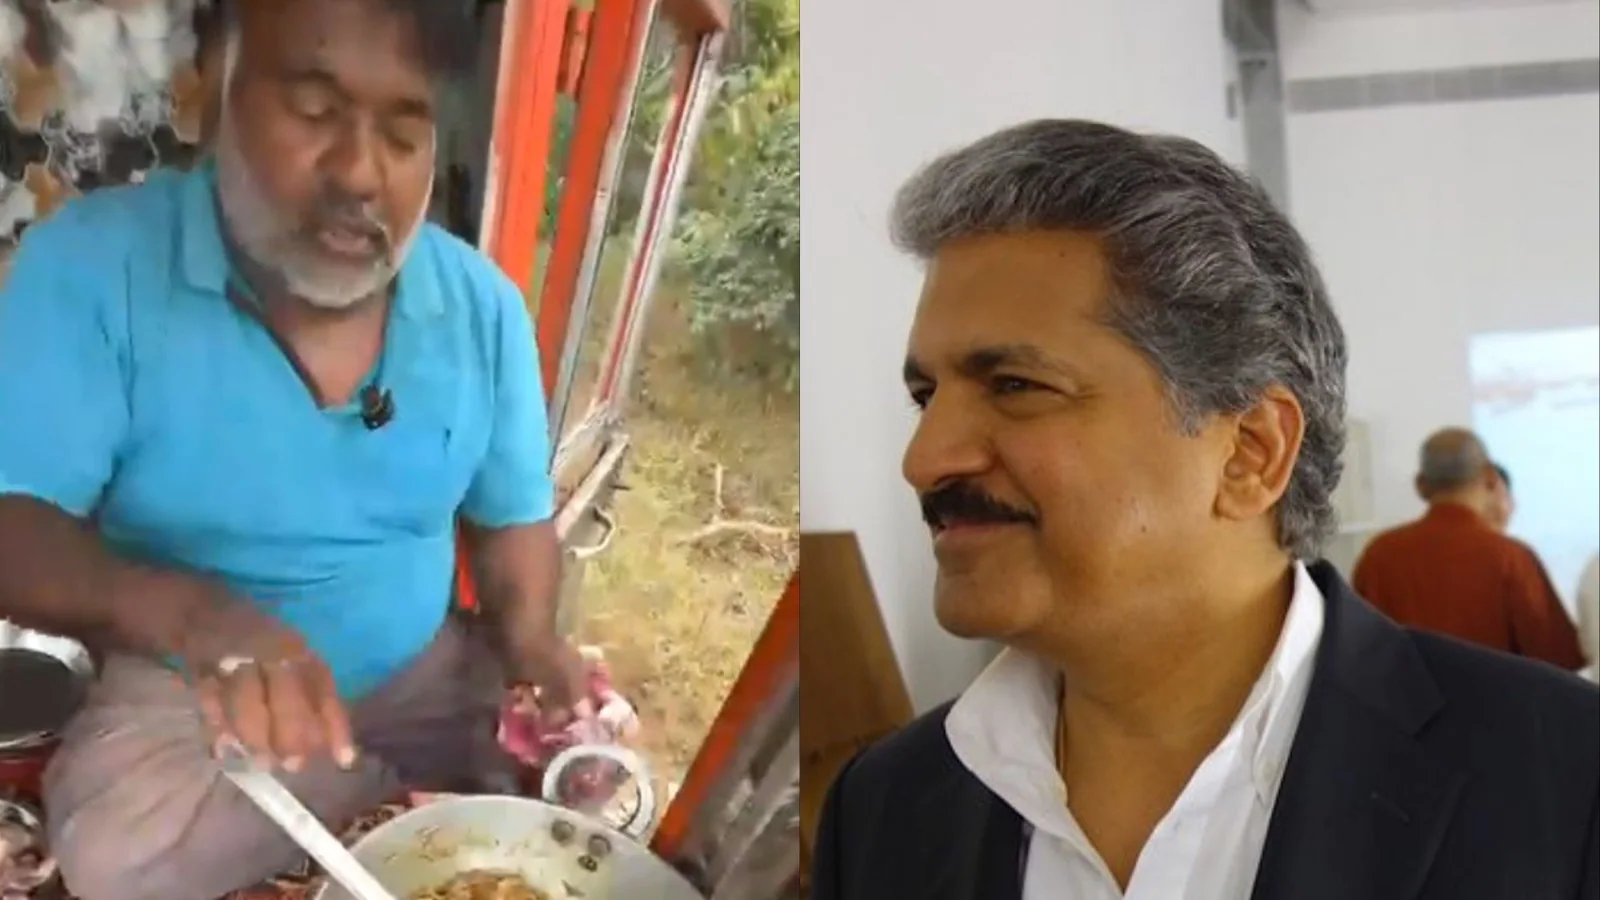 Anand Mahindra shared a video of the truck driver and learned a big lesson.